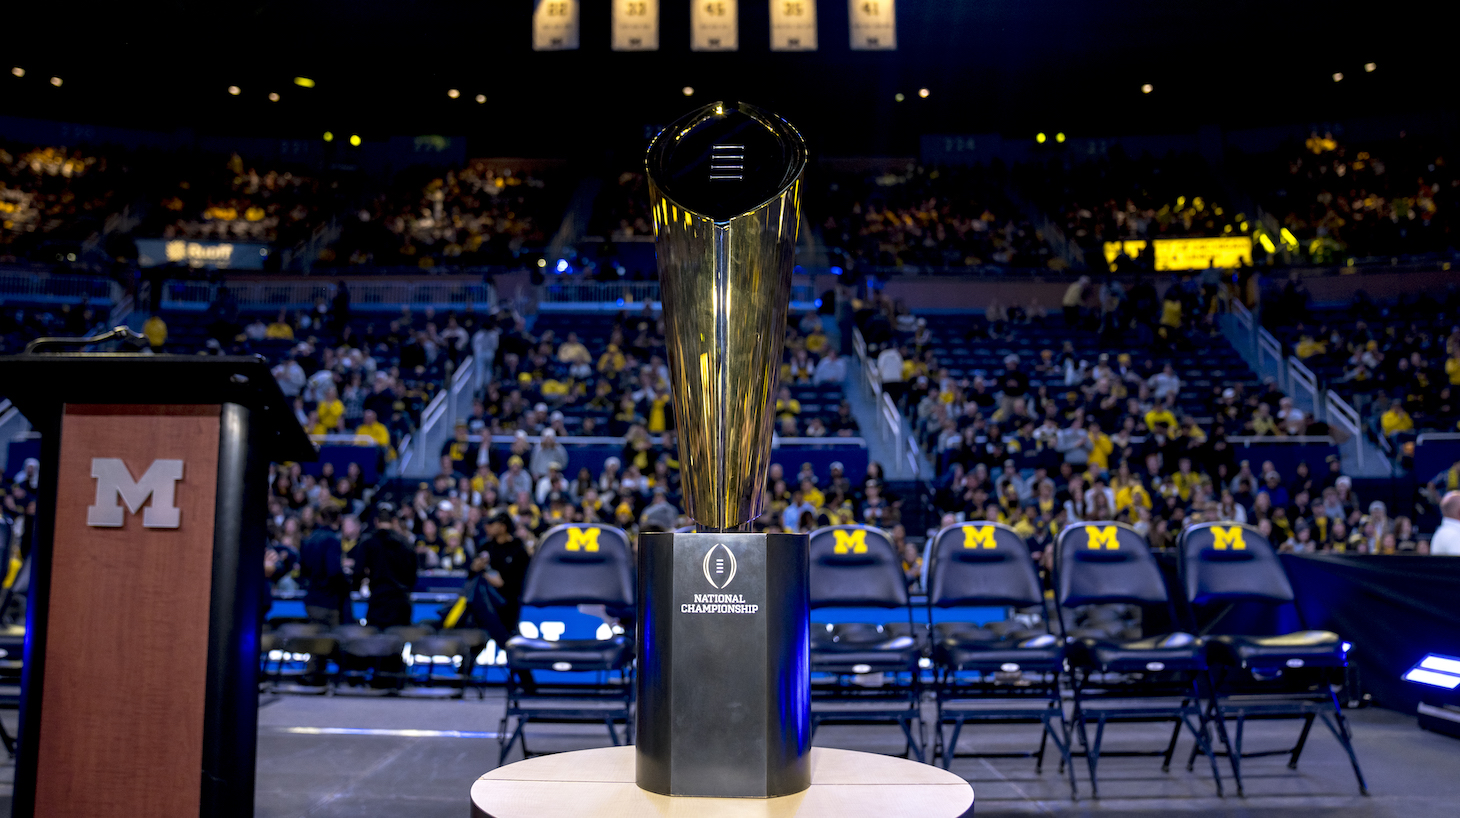 The College Football Playoff National Championship Trophy is pictured during the Michigan Wolverines football National Championship celebration on January 13, 2024 at Crisler Center in Ann Arbor, Michigan.